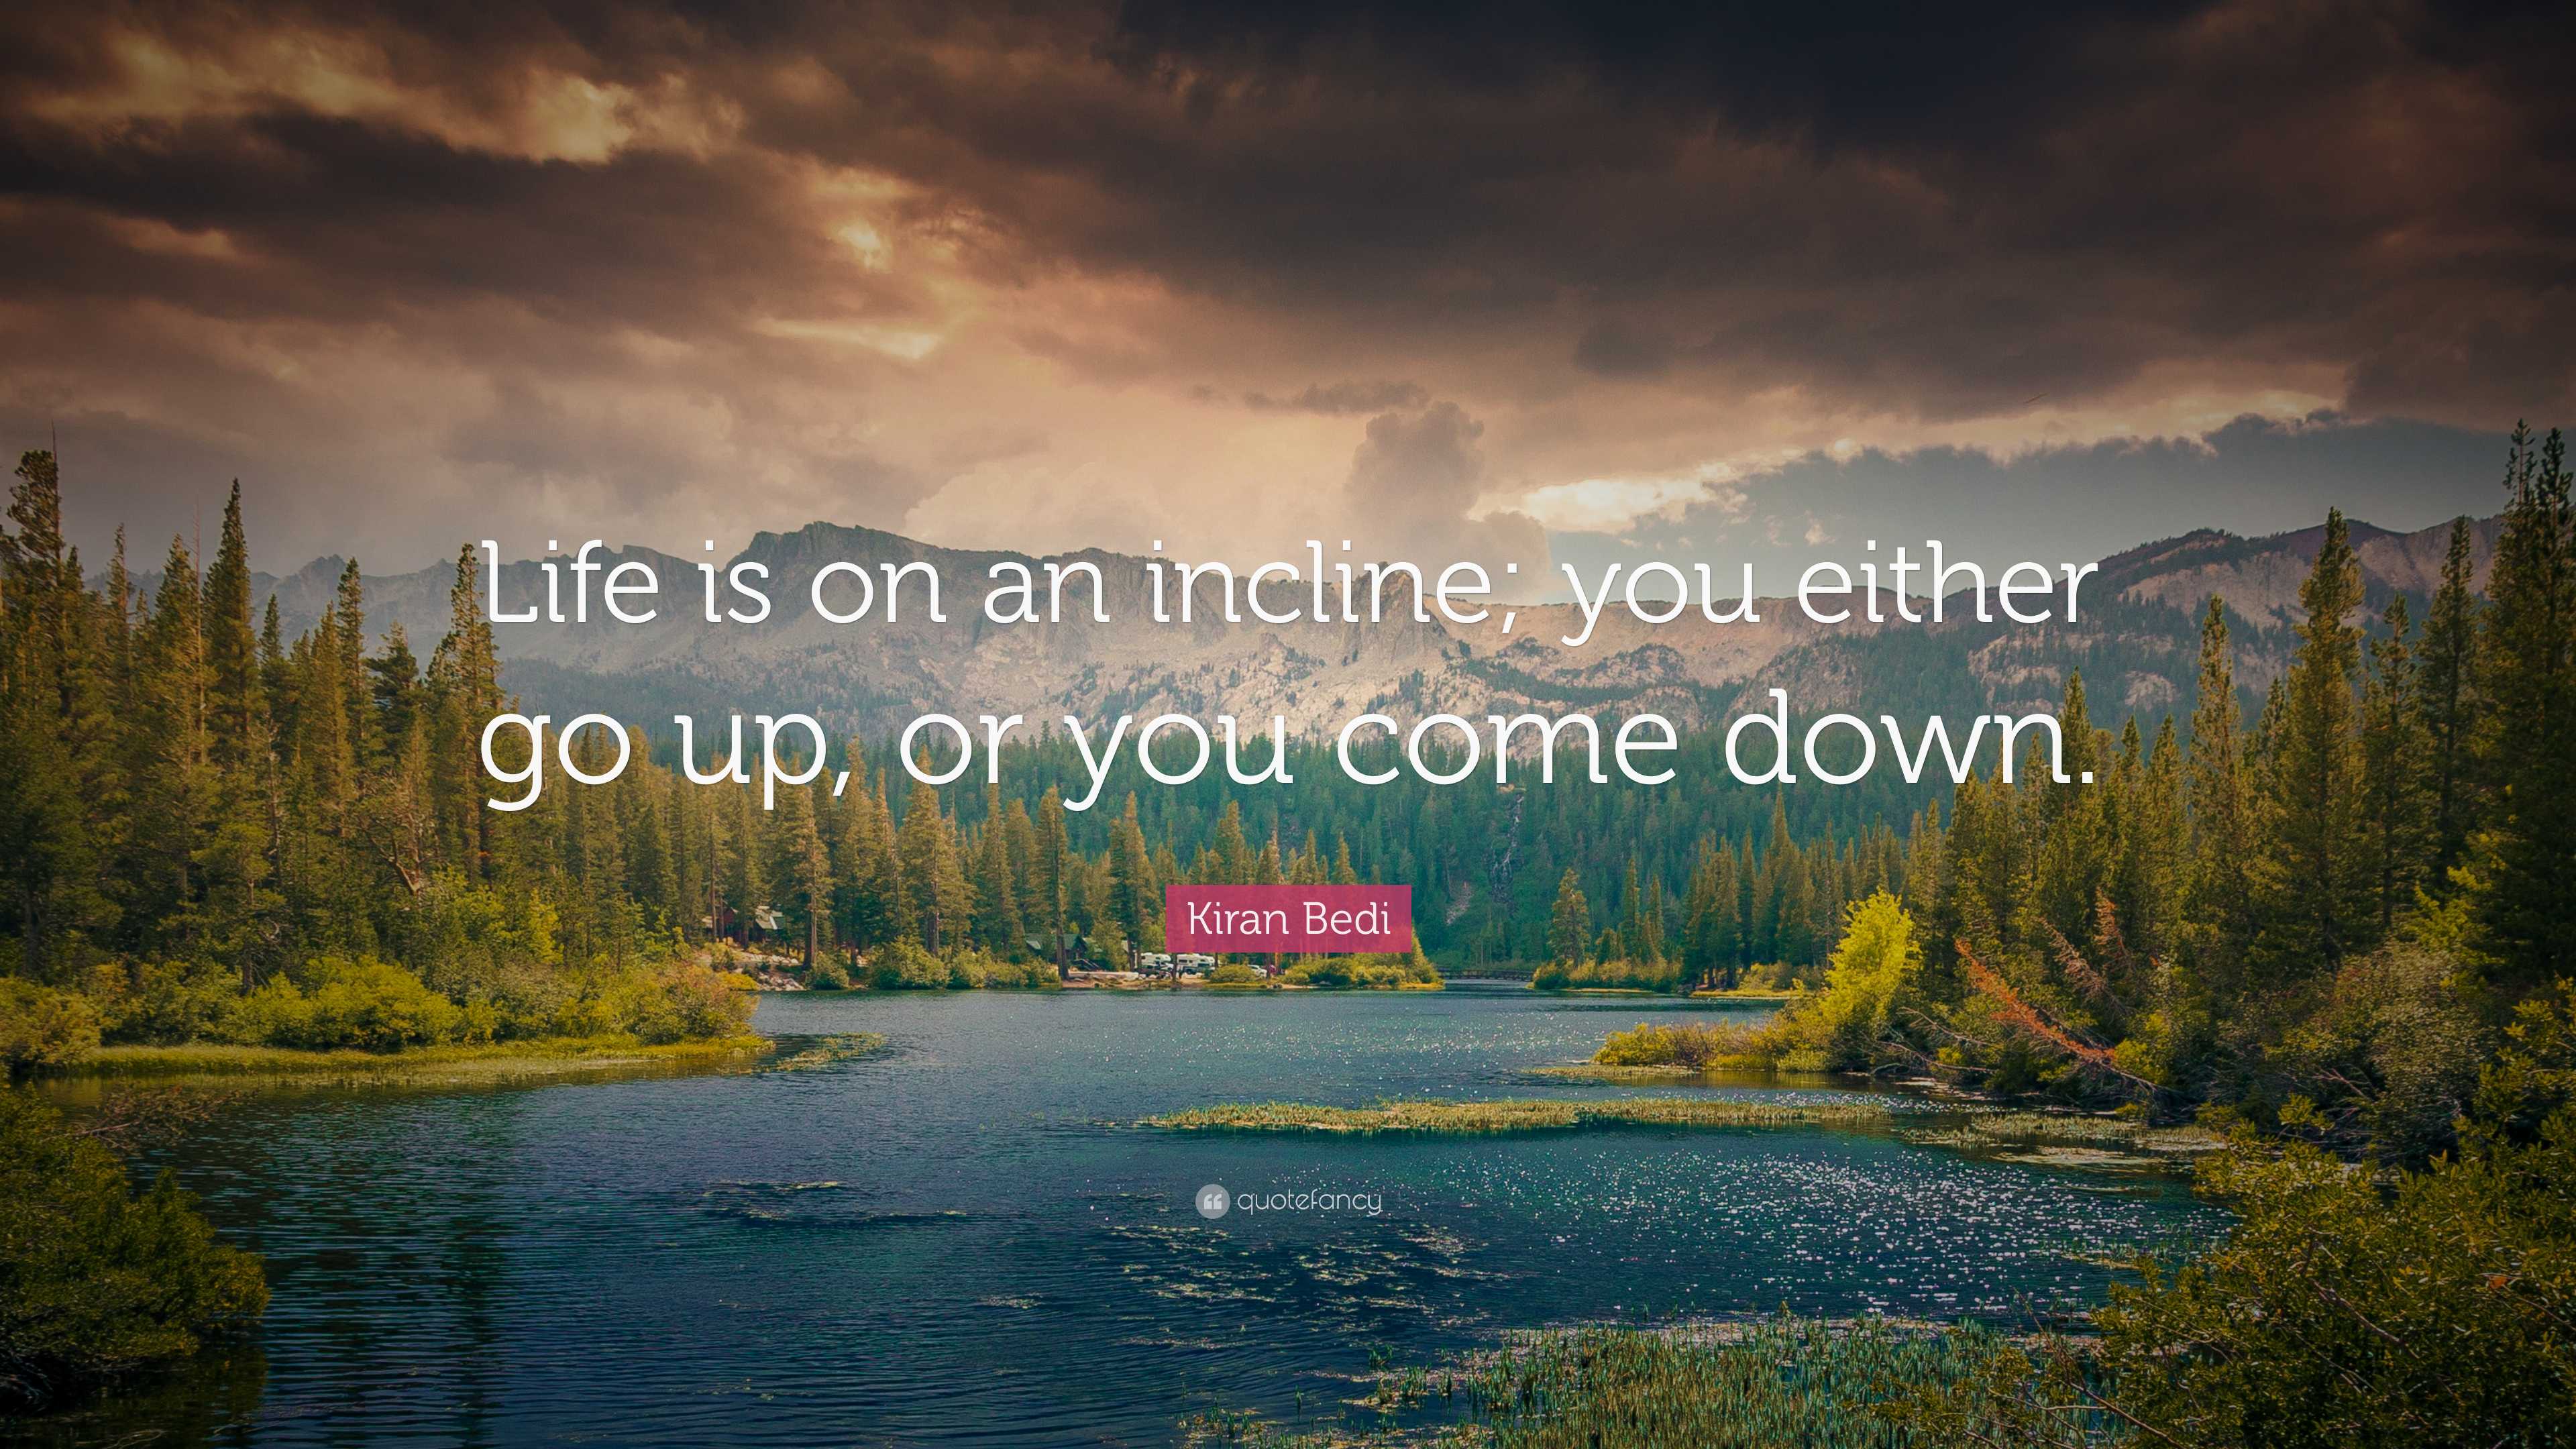 Kiran Bedi Quote: “Life is on an incline; you either go up, or you come ...